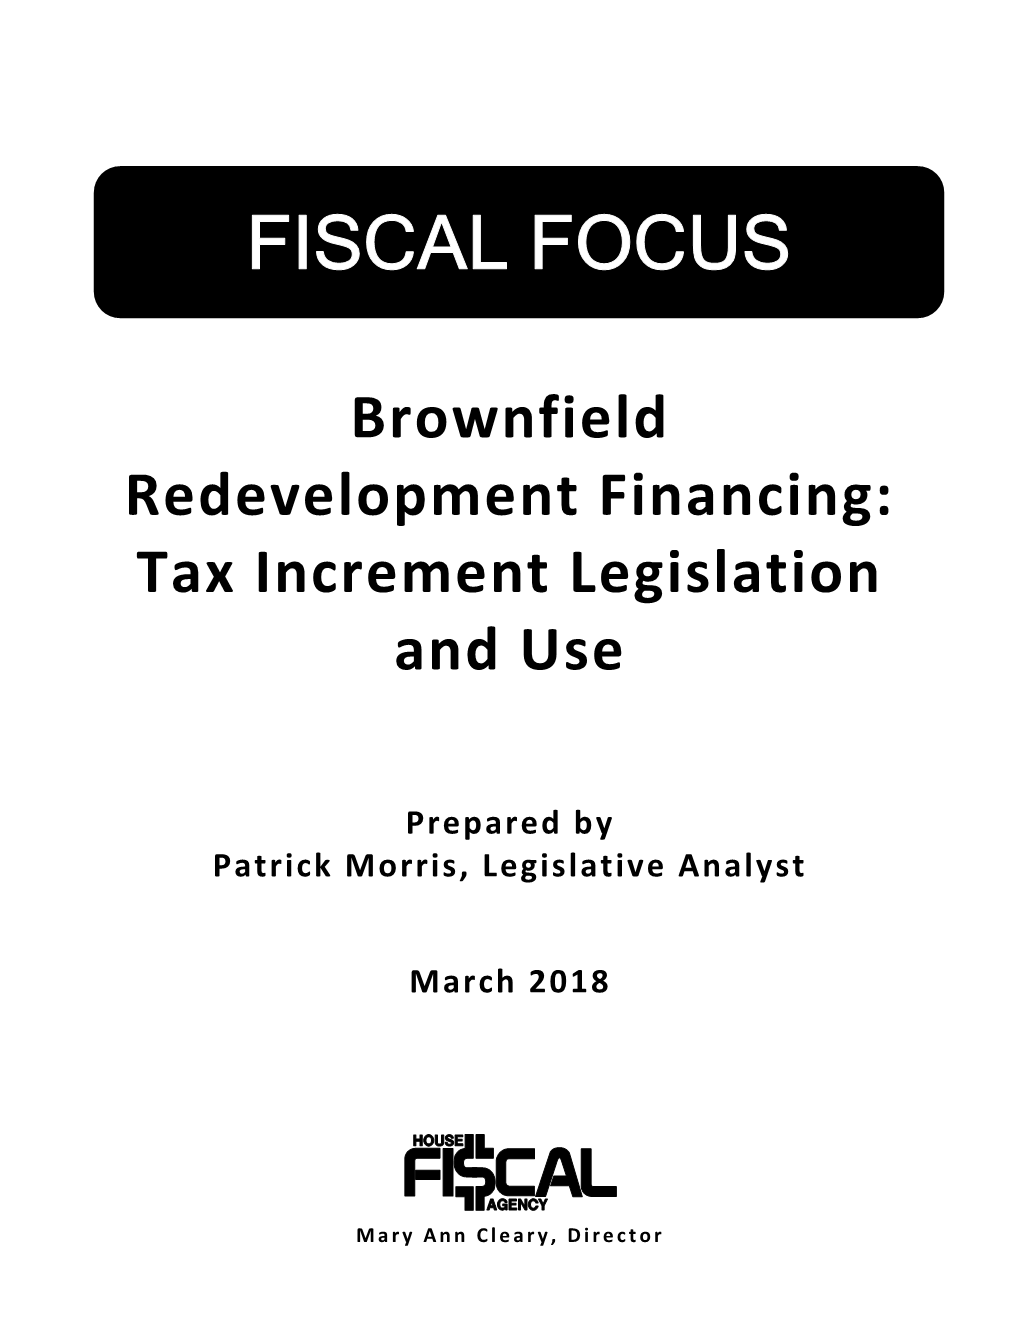 Fiscal Focus: Brownfield Redevelopment Financing: Tax Increment Legislation And